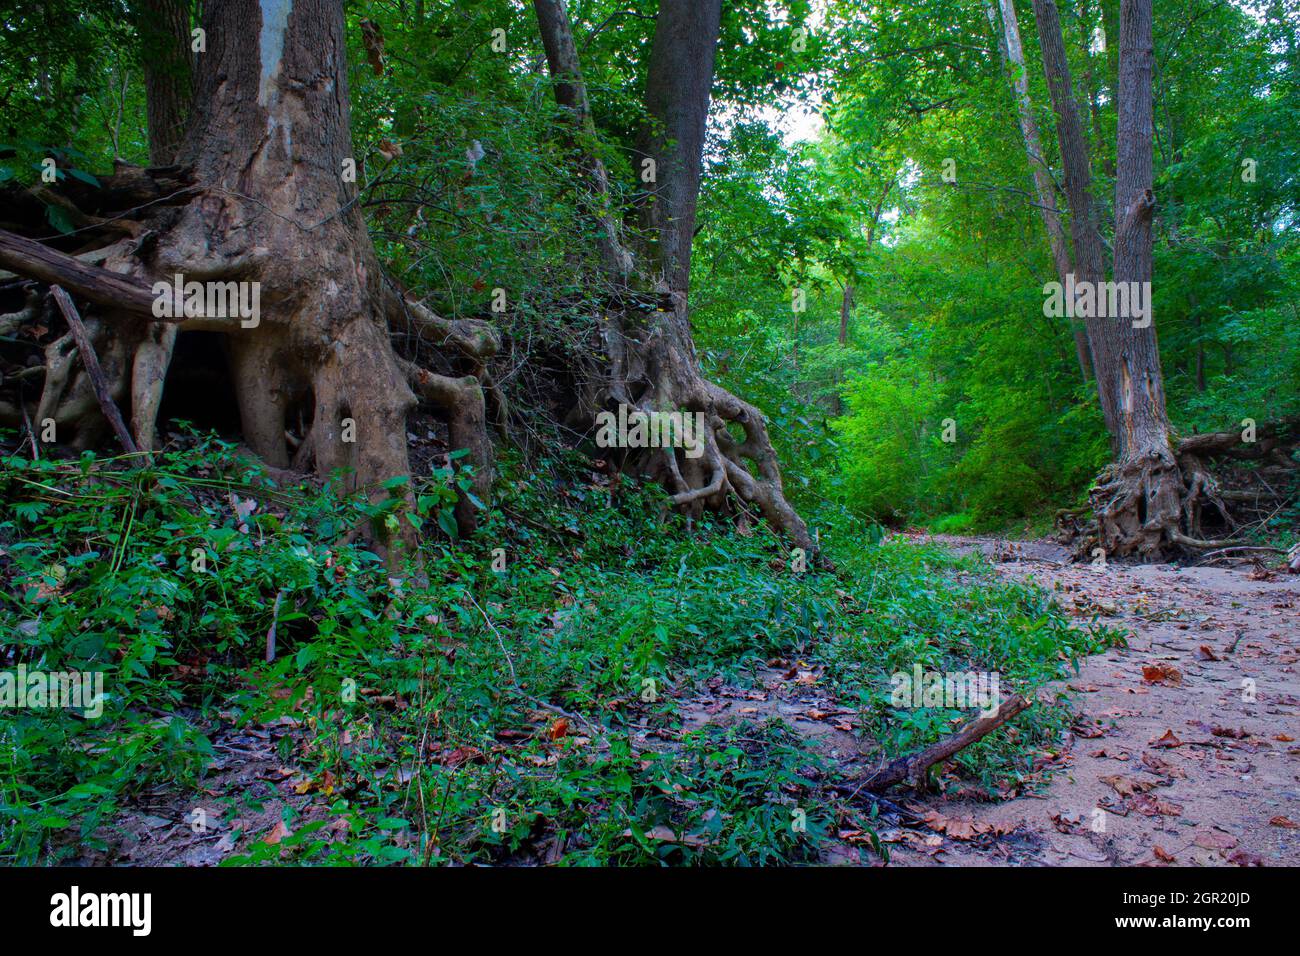 Rooty Sycamore Trees In A Dry Illinois Creek Bed Stock Photo